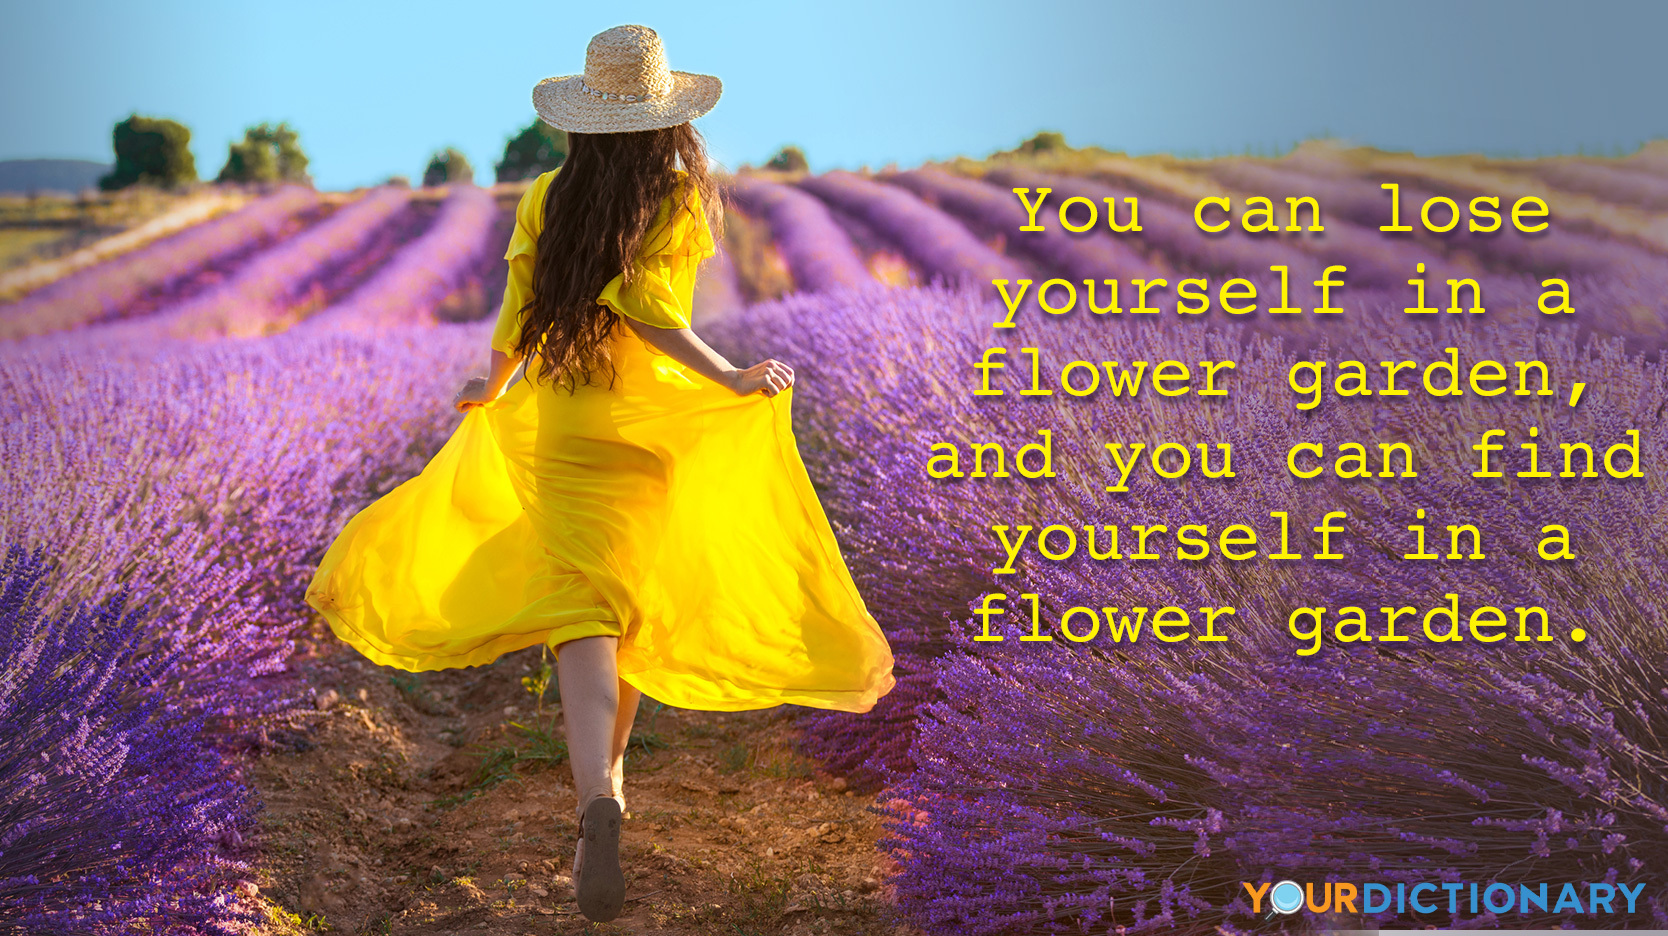 Woman on Lavender Field as Flower Quotes Example